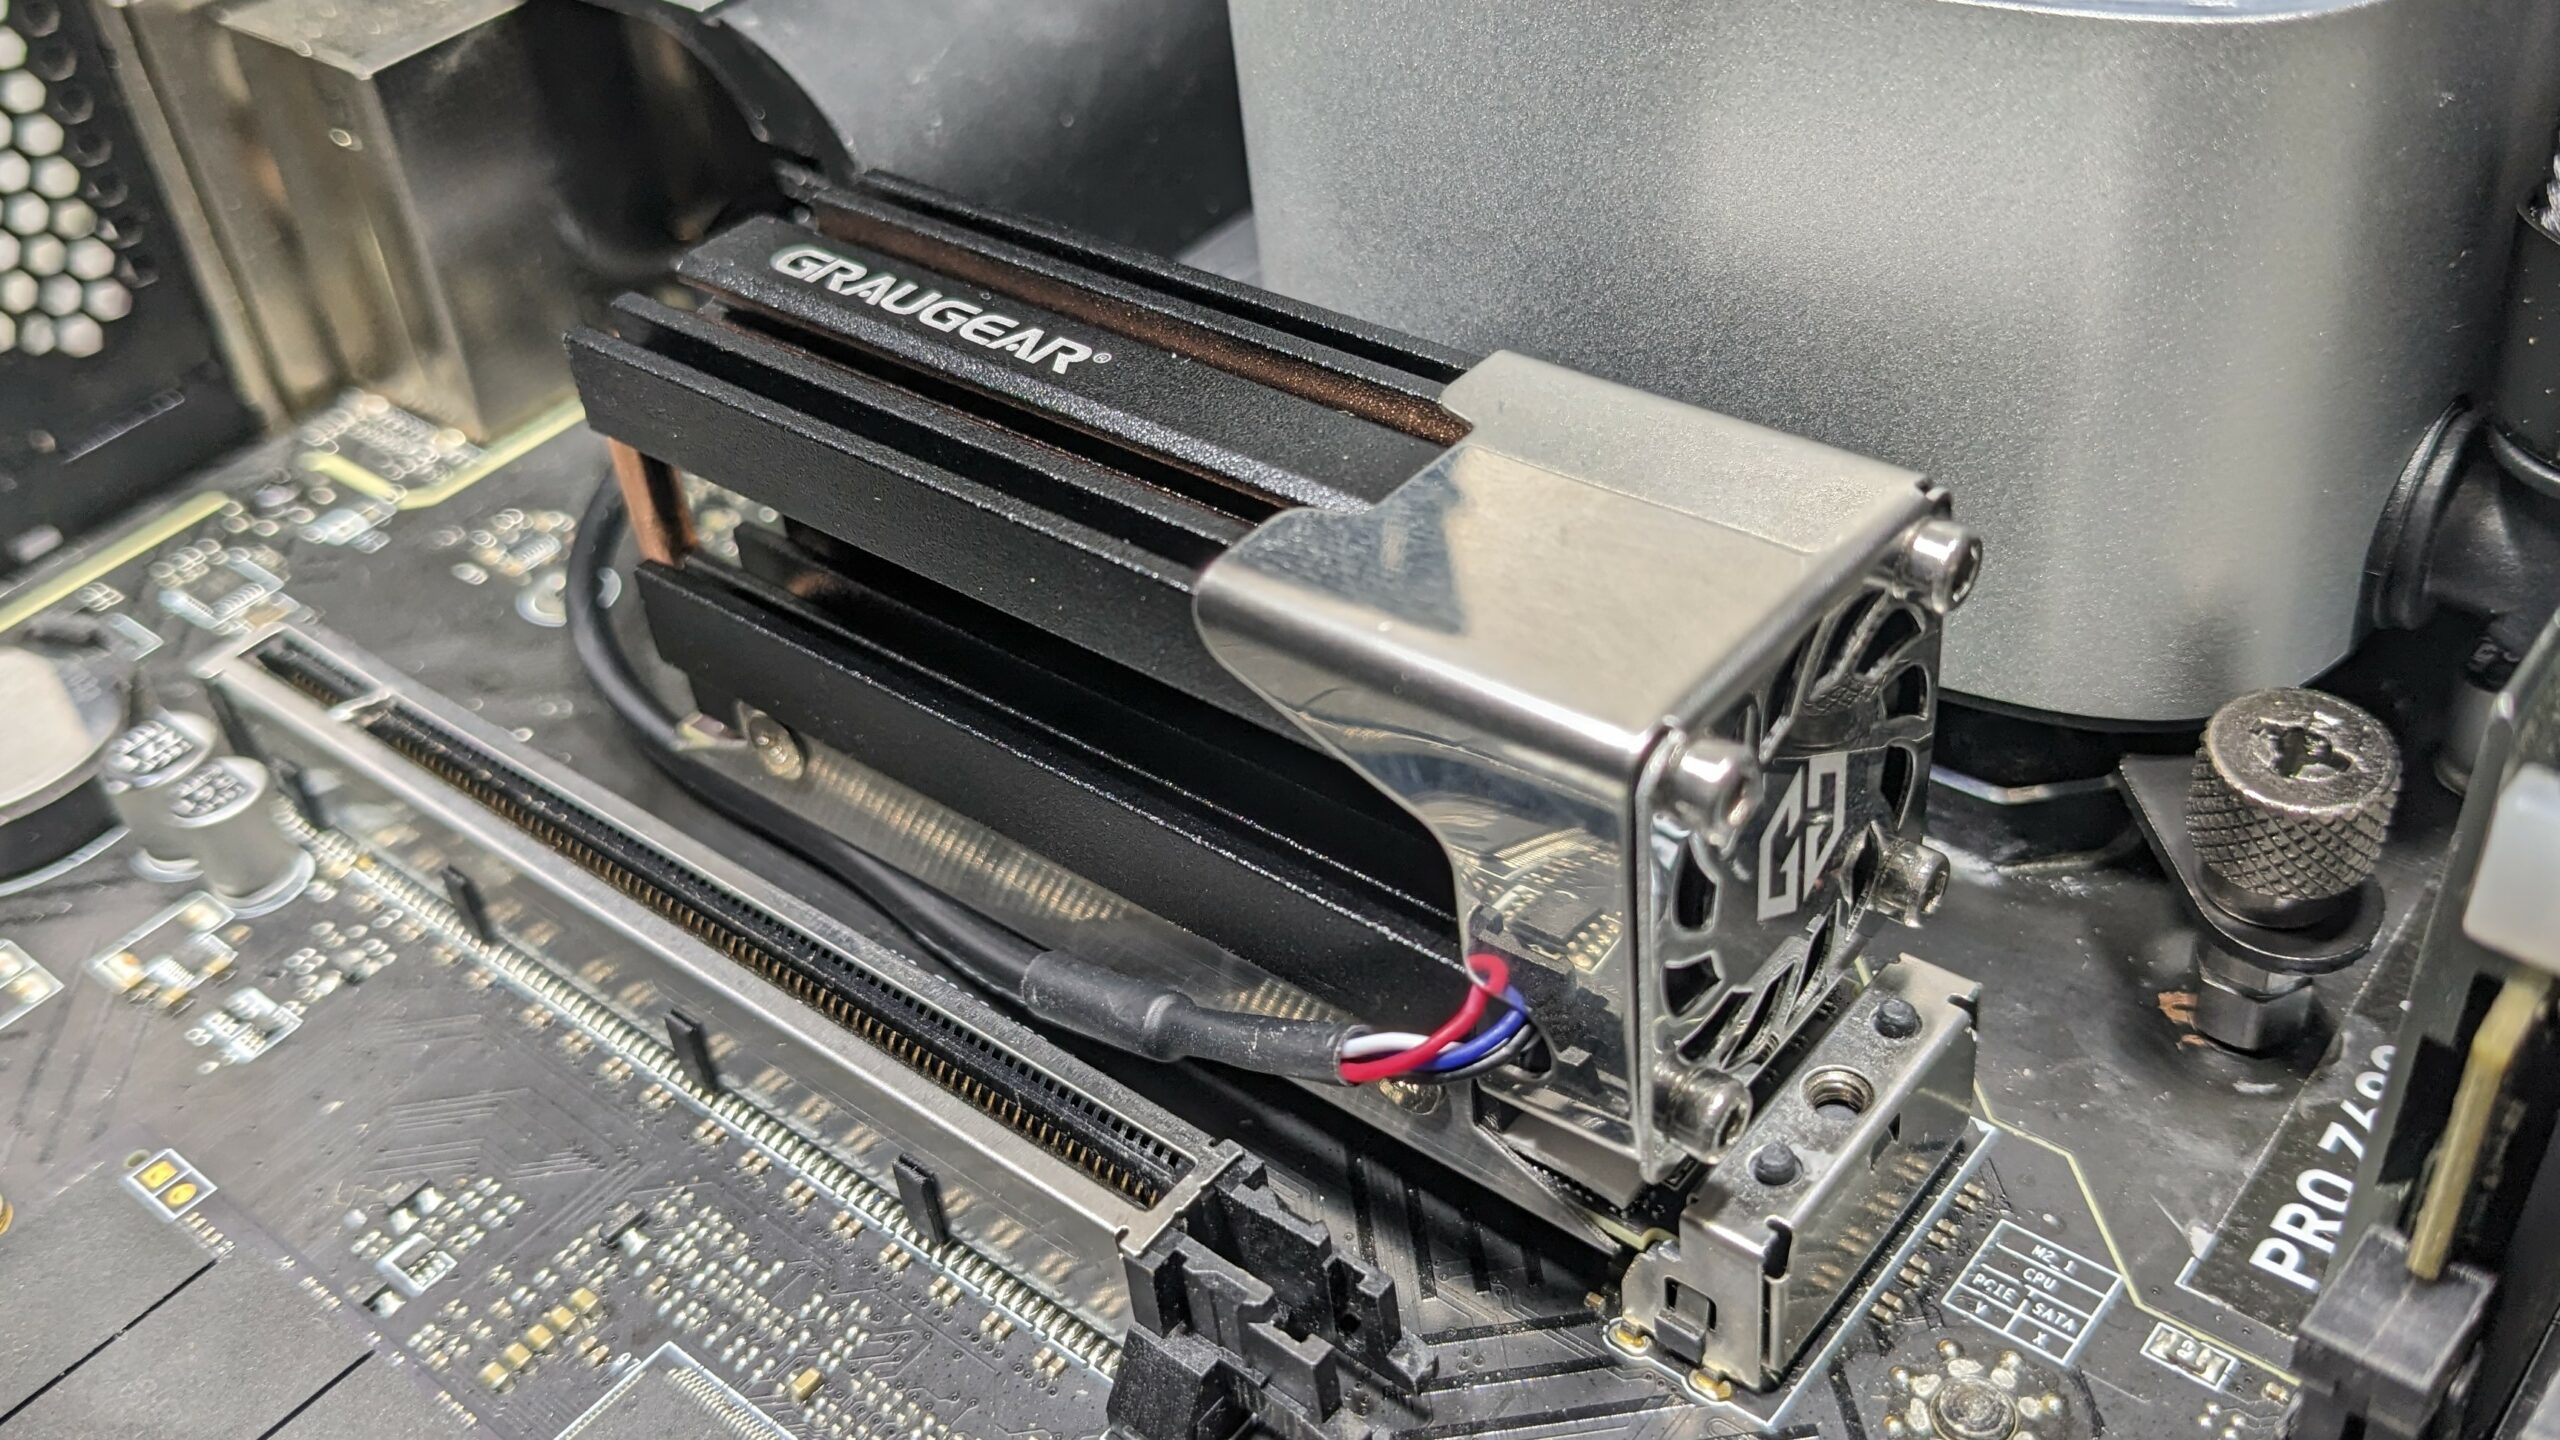 Heatpipes and an active fan make for cooling domination: Graugear G-M2HS03-F review